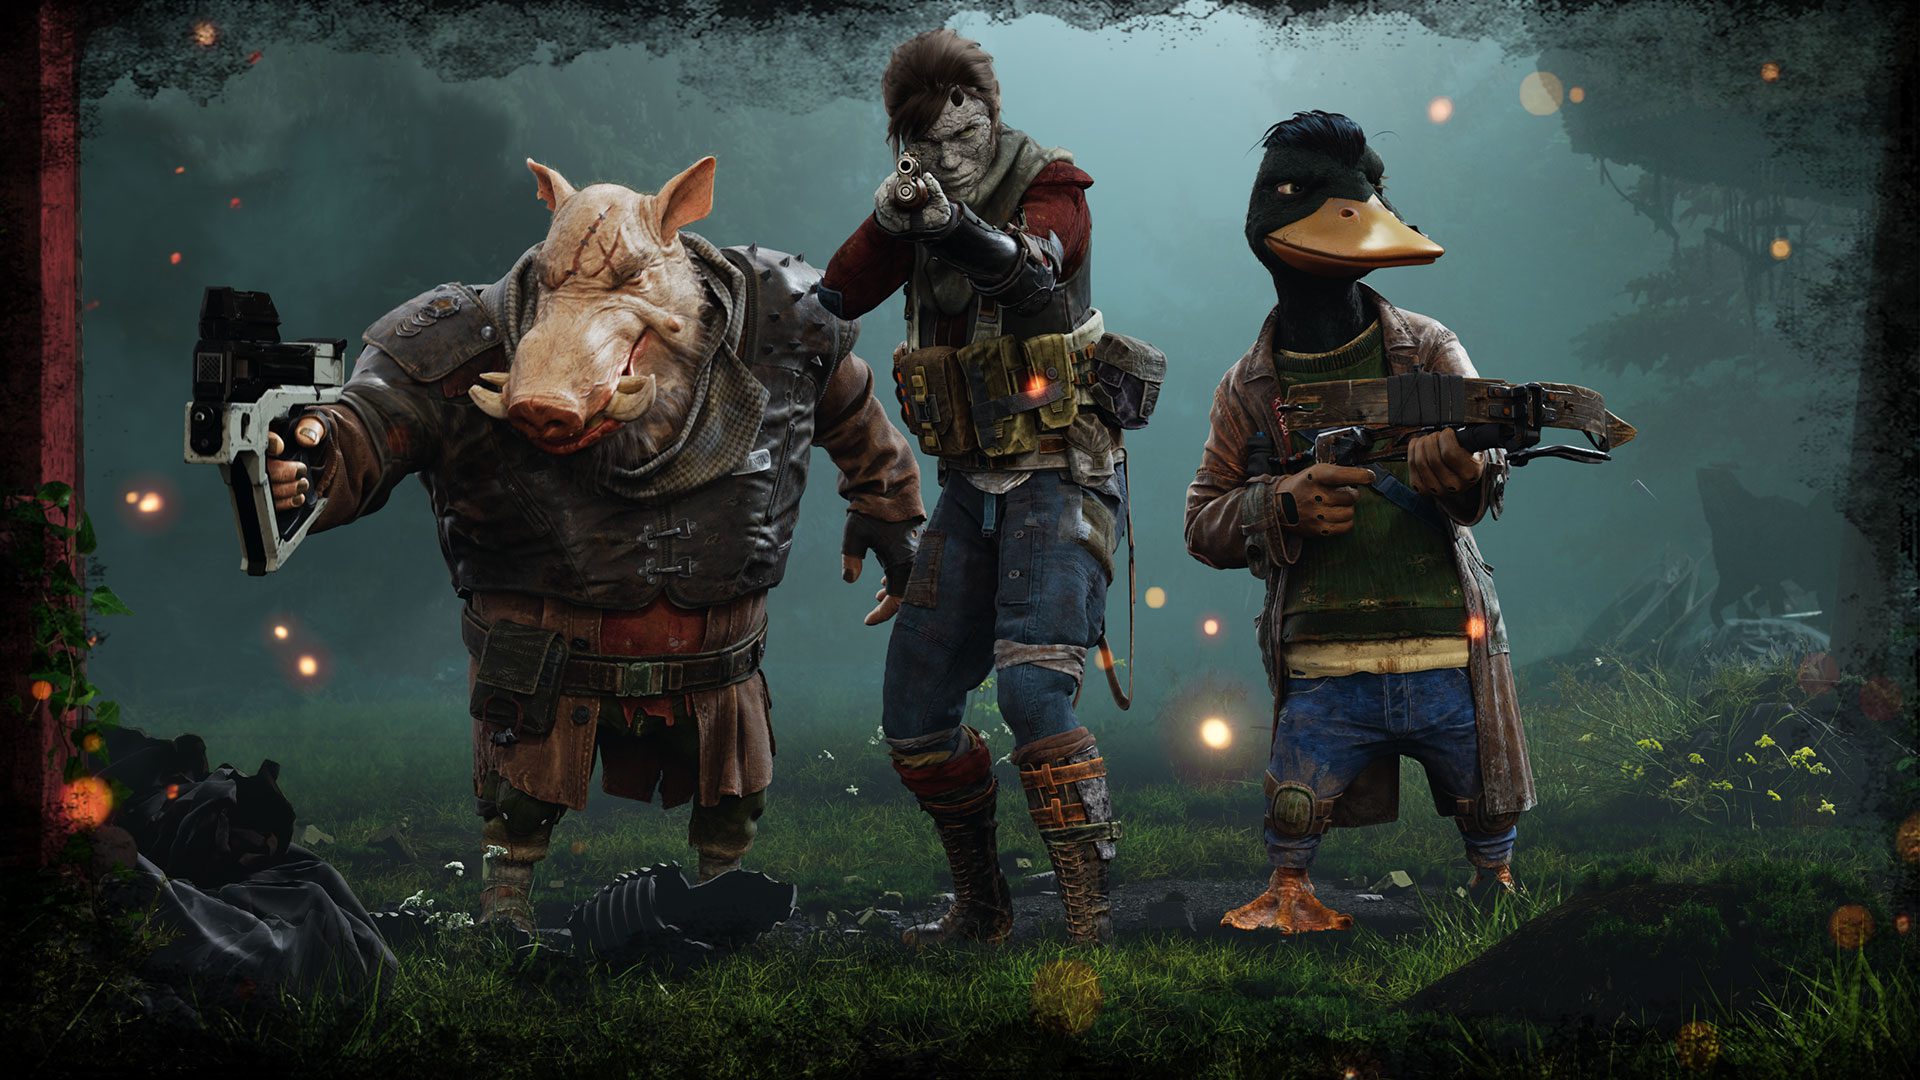 Mutant Year Zero video gives us all new insights into the game